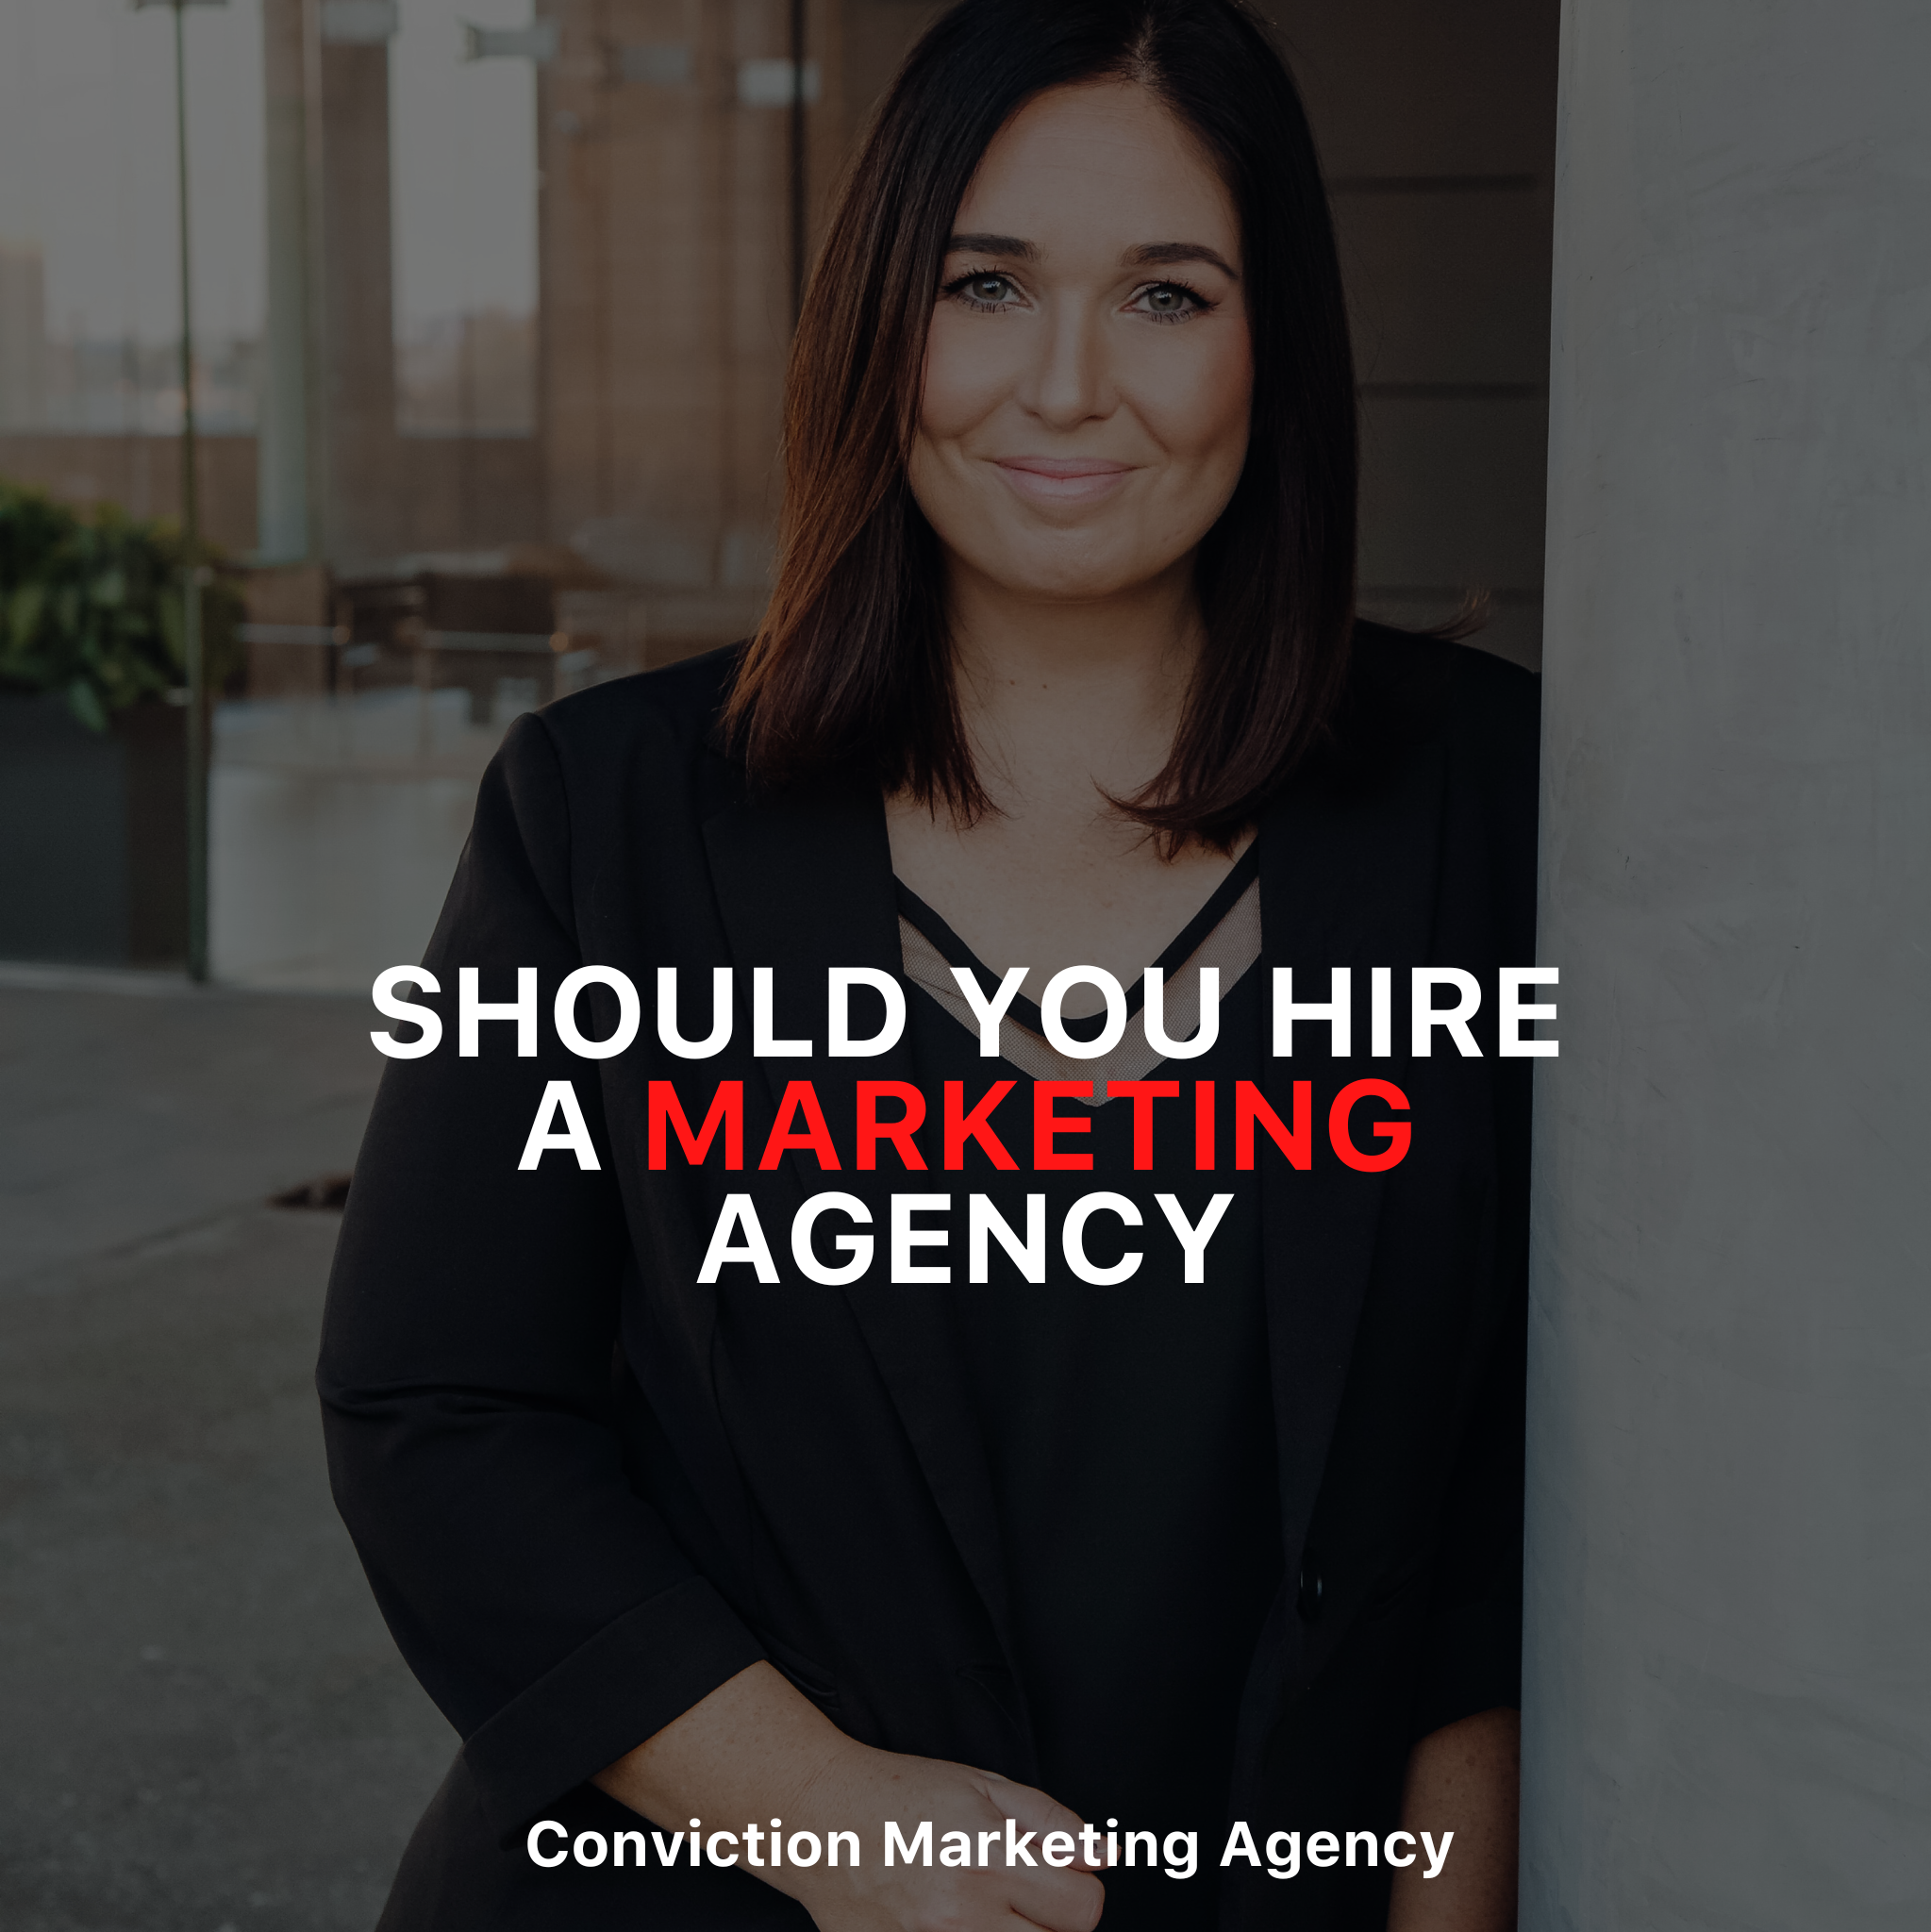 Should you hire a marketing agency?